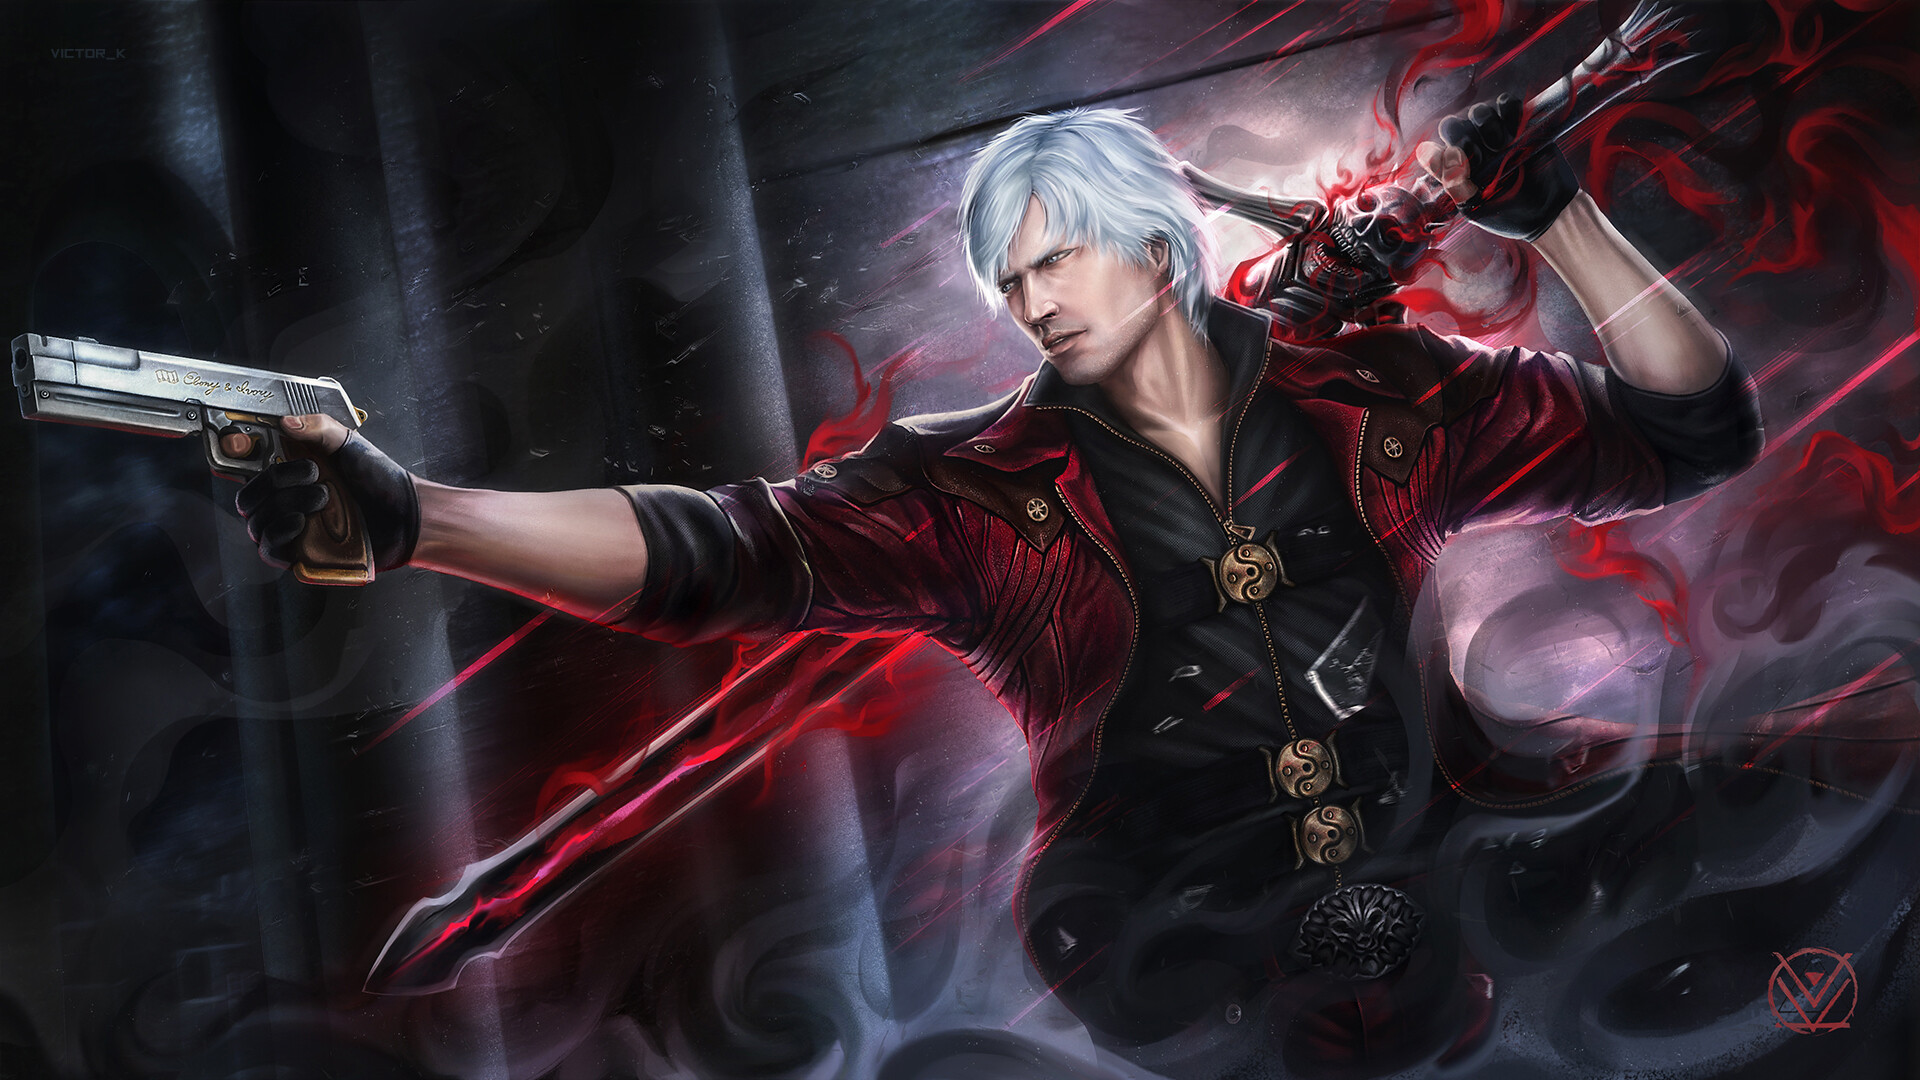 Devil may cry game. Данте Devil May Cry. Данте девил май край 5. Данте девил май край 4. Данте ДМС 5.